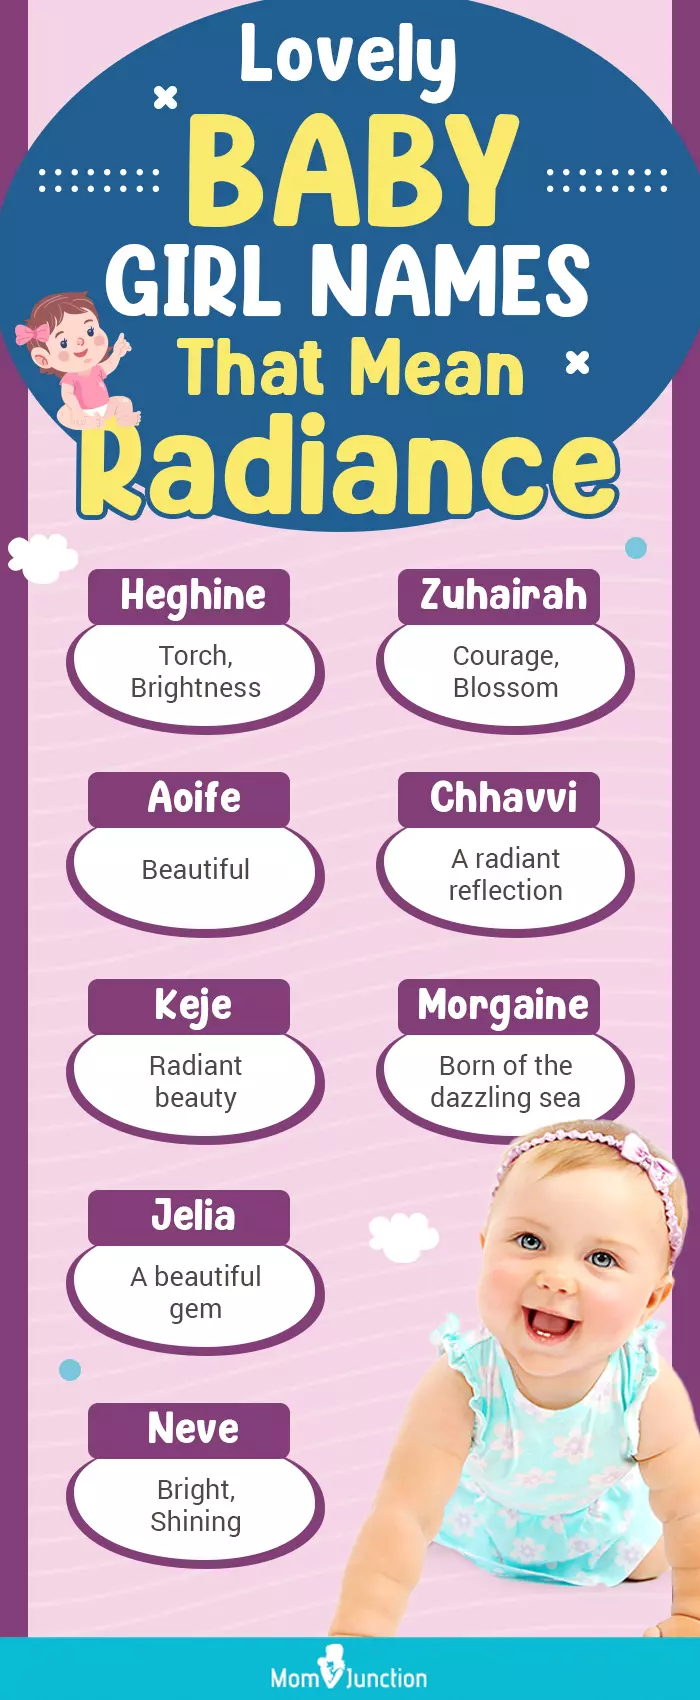 lovely baby girl names that mean radiance (infographic)